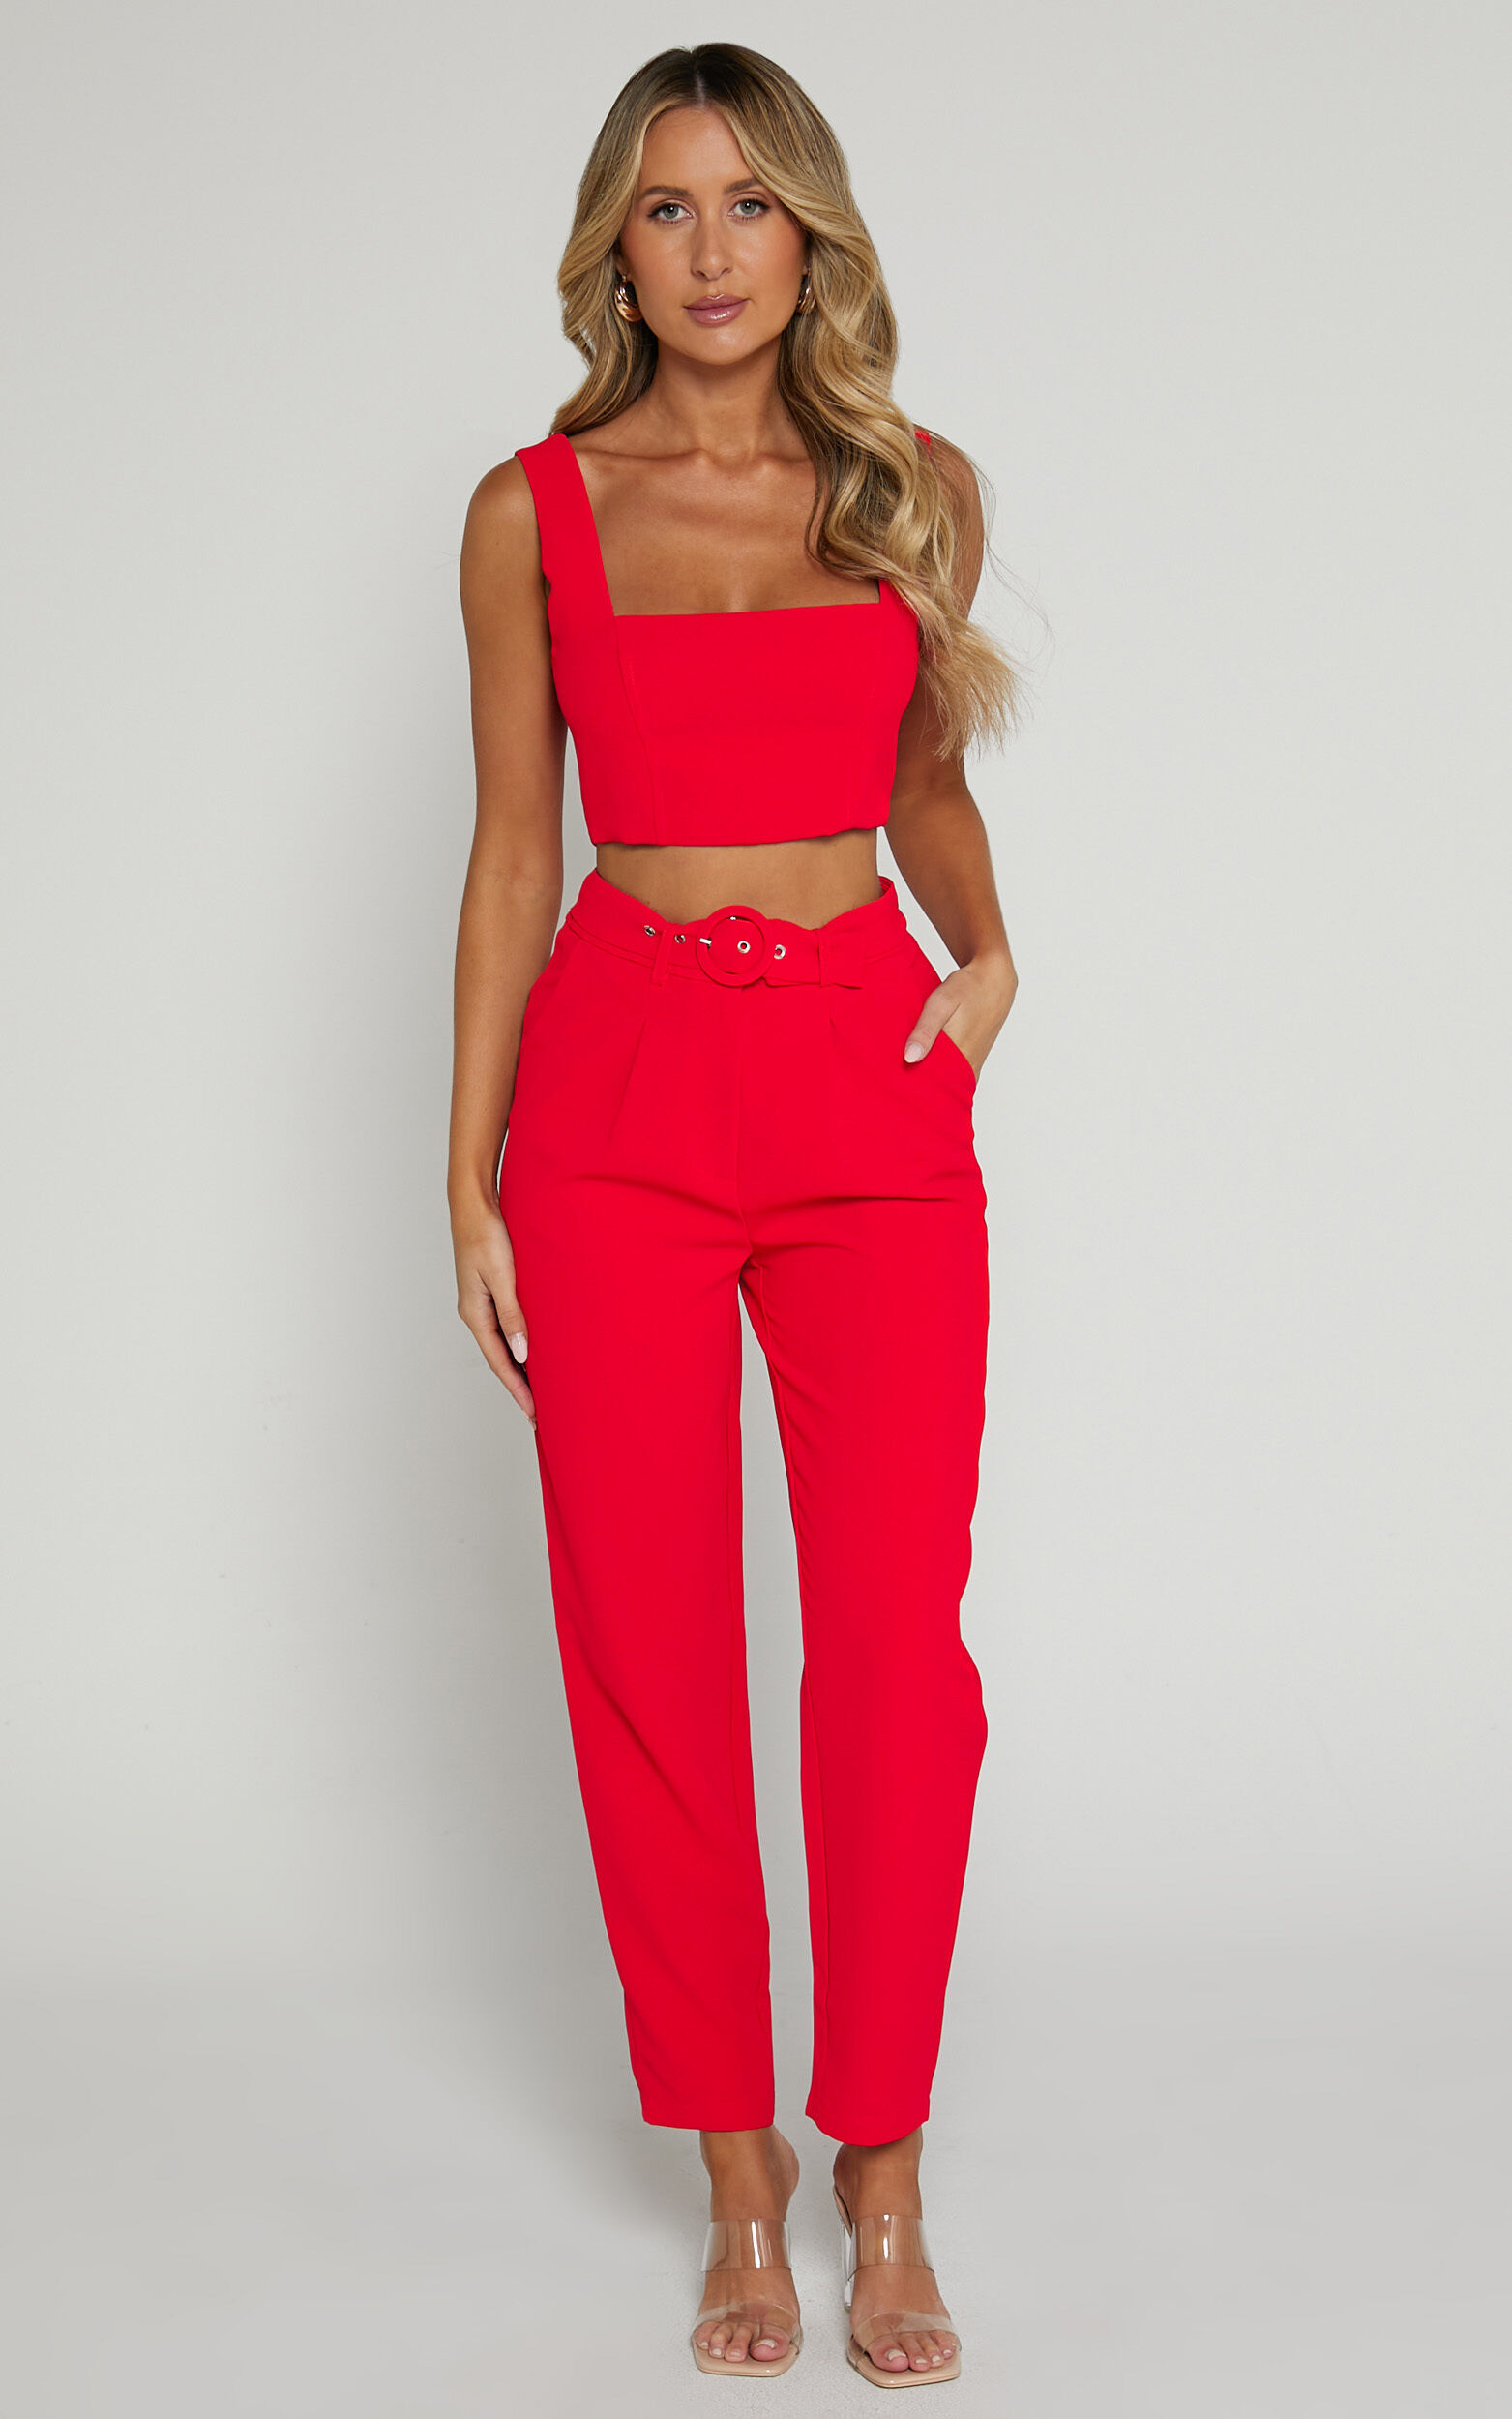 https://images.showpo.com/dw/image/v2/BDPQ_PRD/on/demandware.static/-/Sites-sp-master-catalog/default/dwb04f0070/images/reyna-two-piece-tailored-pant-set-with-crop-top-SC22040022/Reyna_Two_Piece_Set_-_Crop_Top_and_Tailored_Pants_in_Red_2.jpg?sw=1563&sh=2500